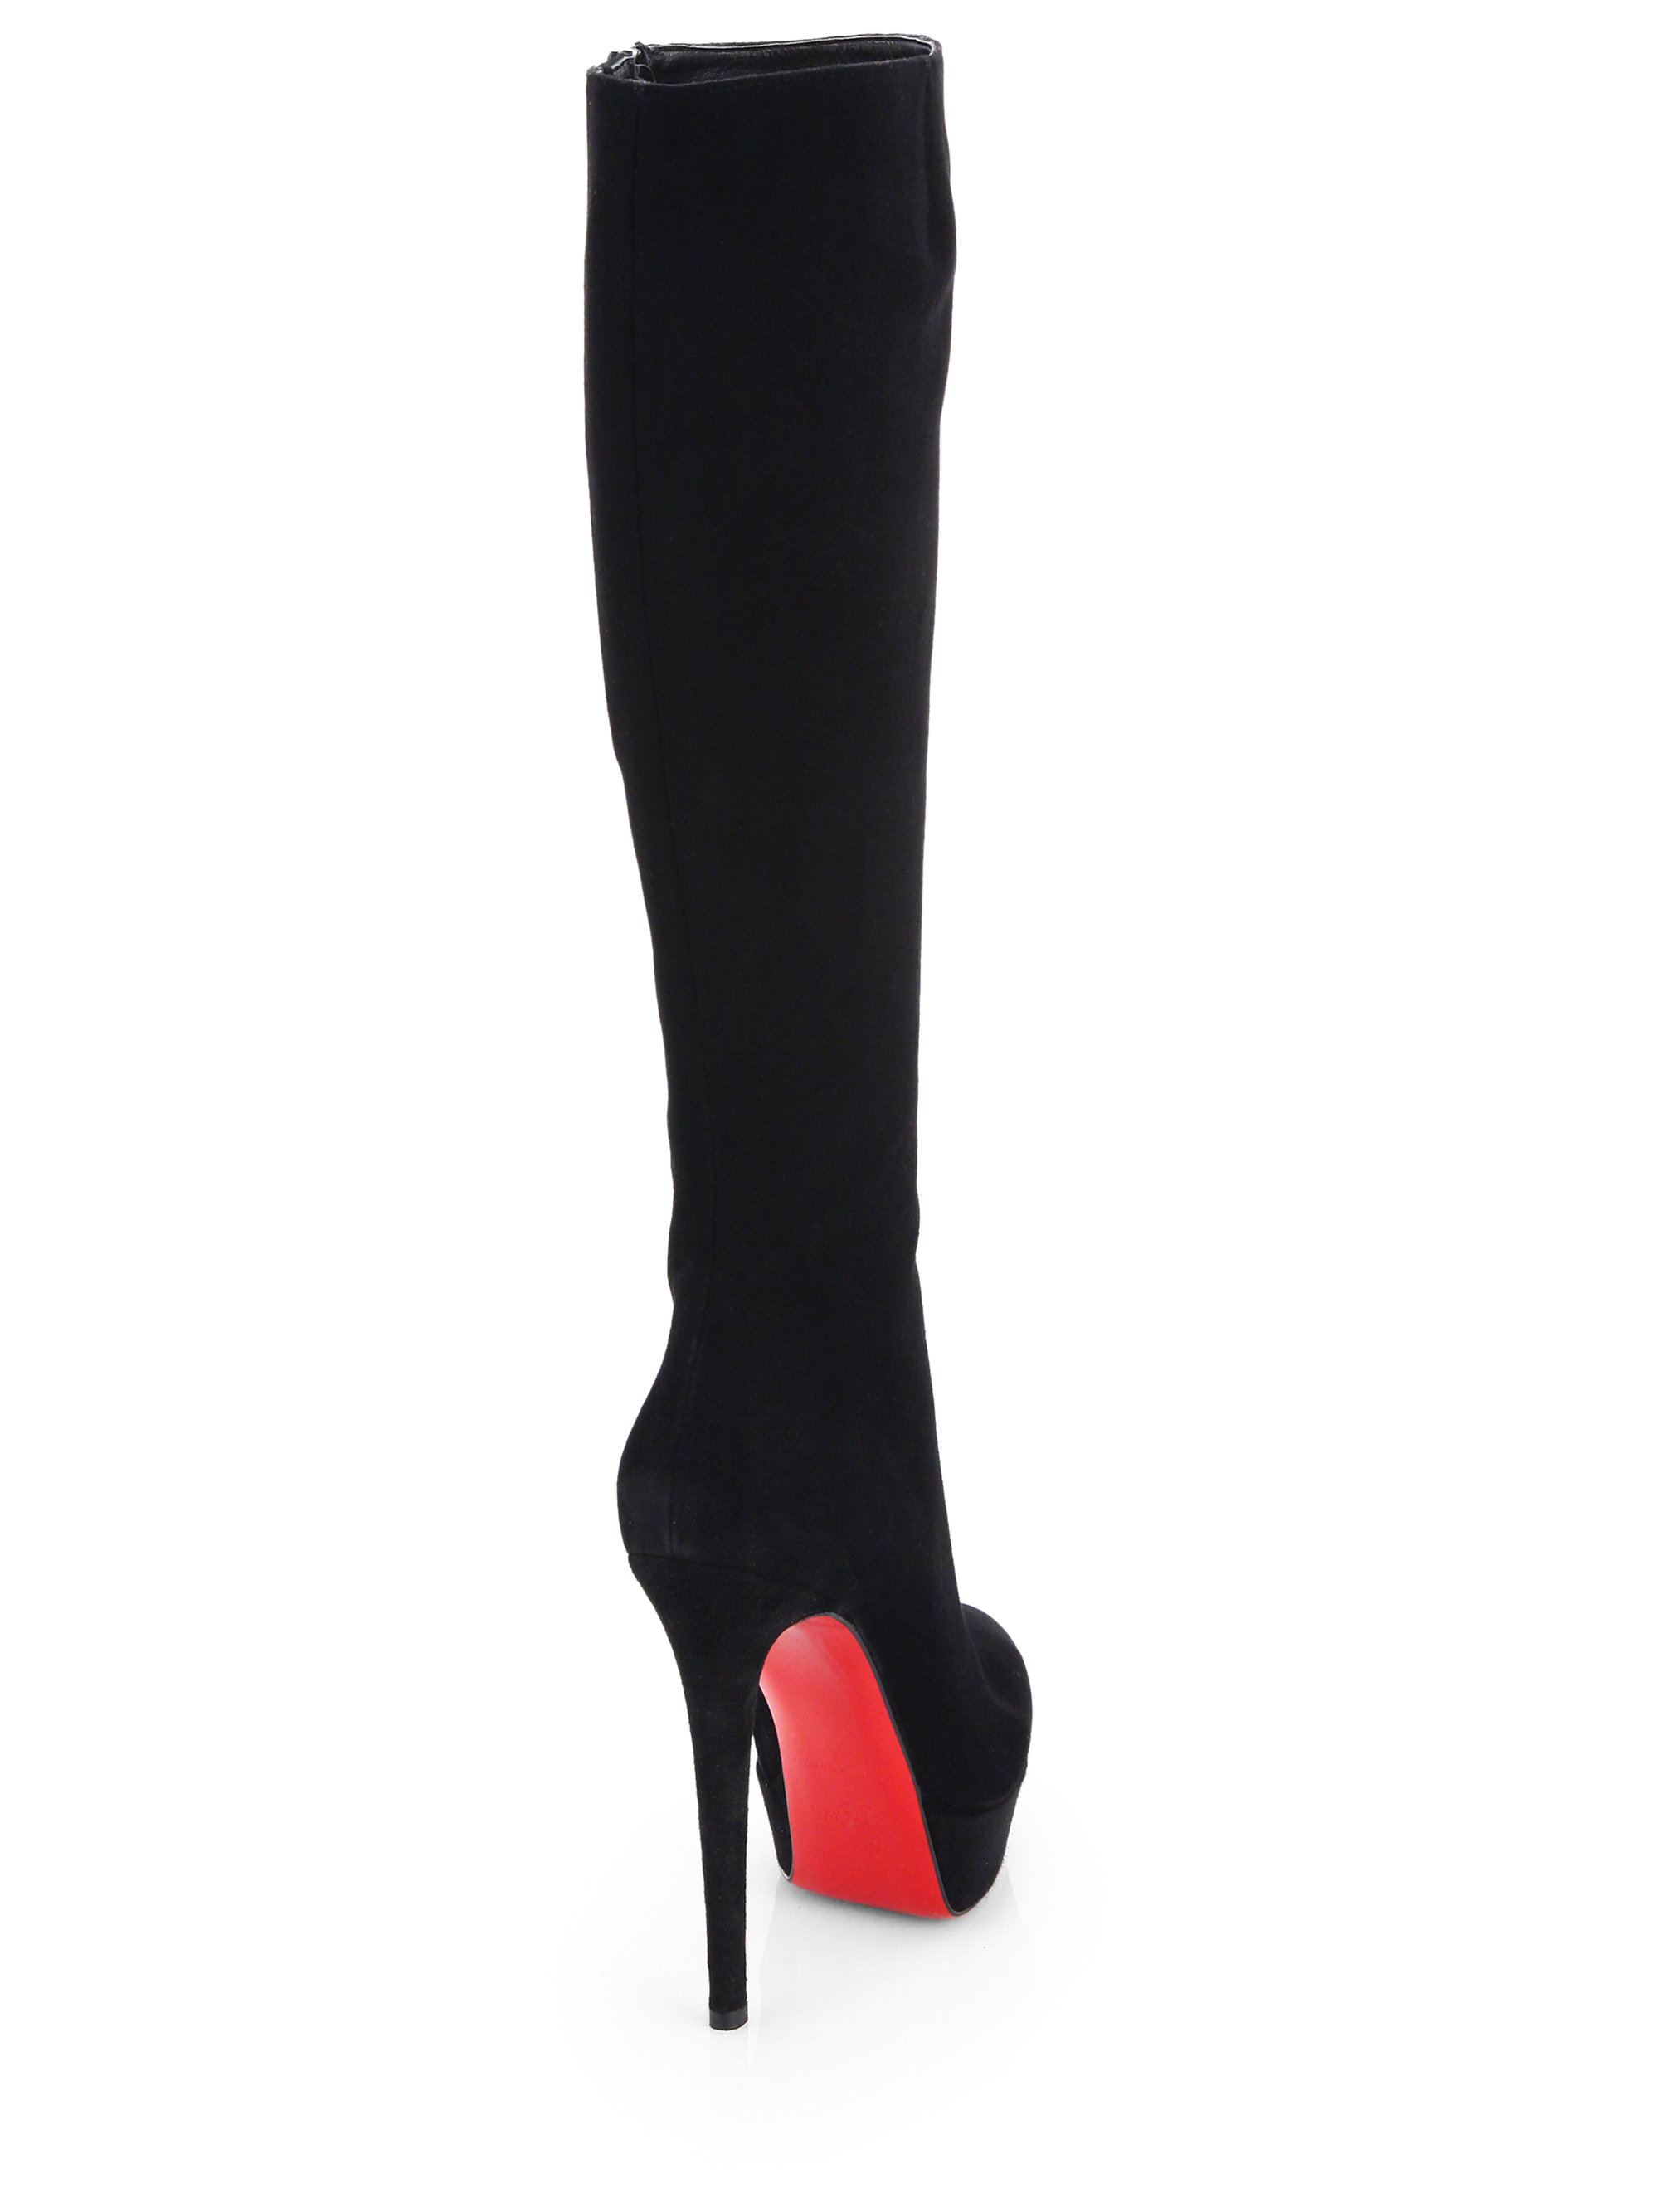 christian louboutin knee-high boots Black suede covered heels ...  